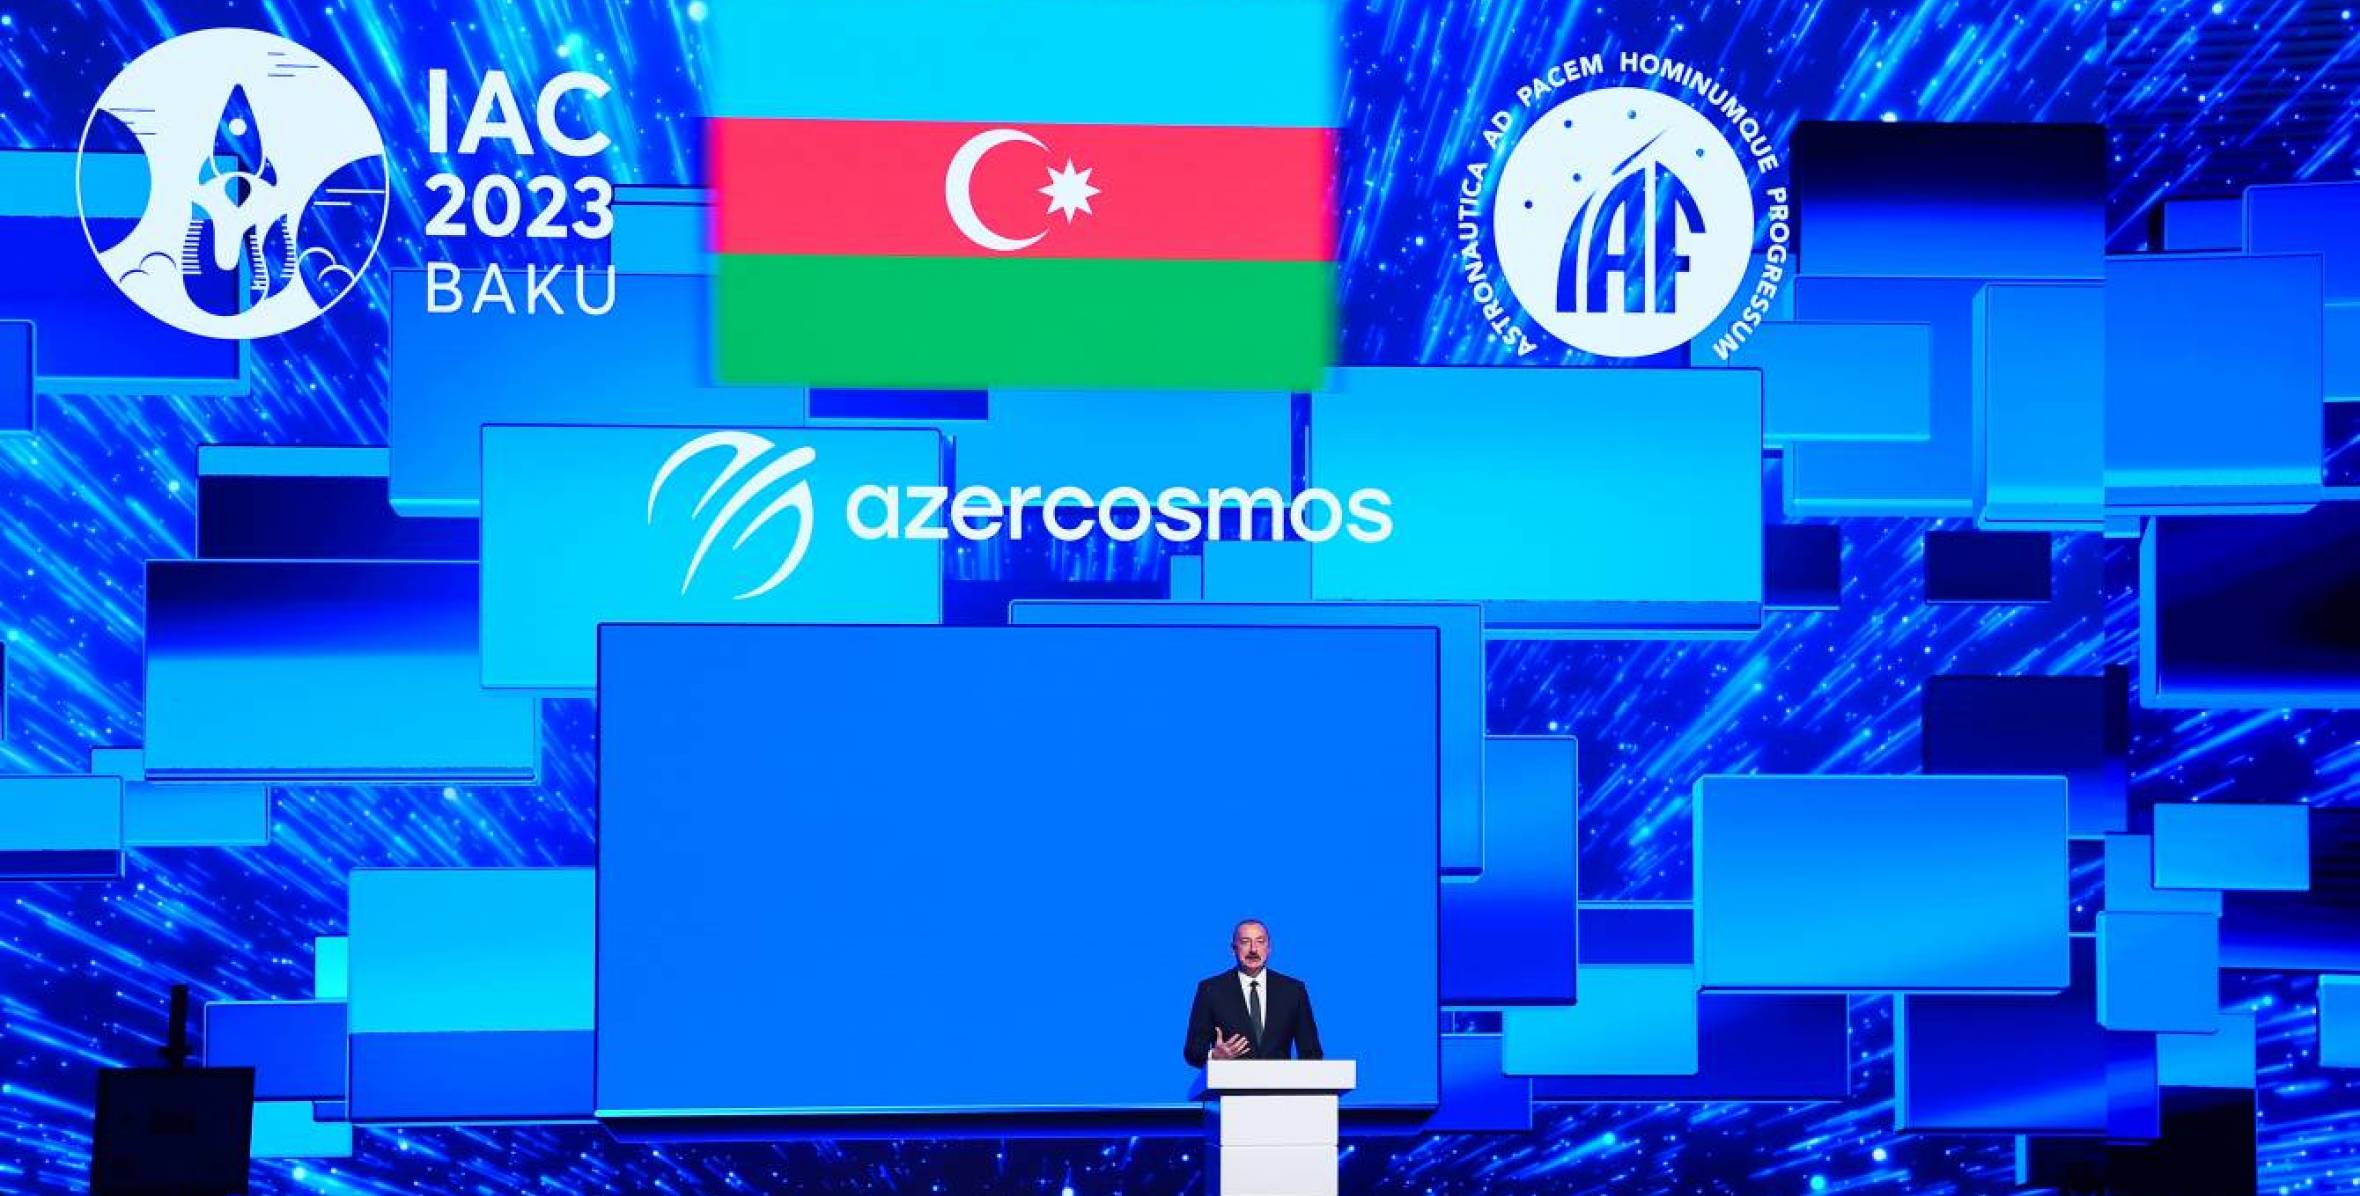 Speech by Ilham Aliyev at the opening ceremony of the 74th International Astronautical Congress